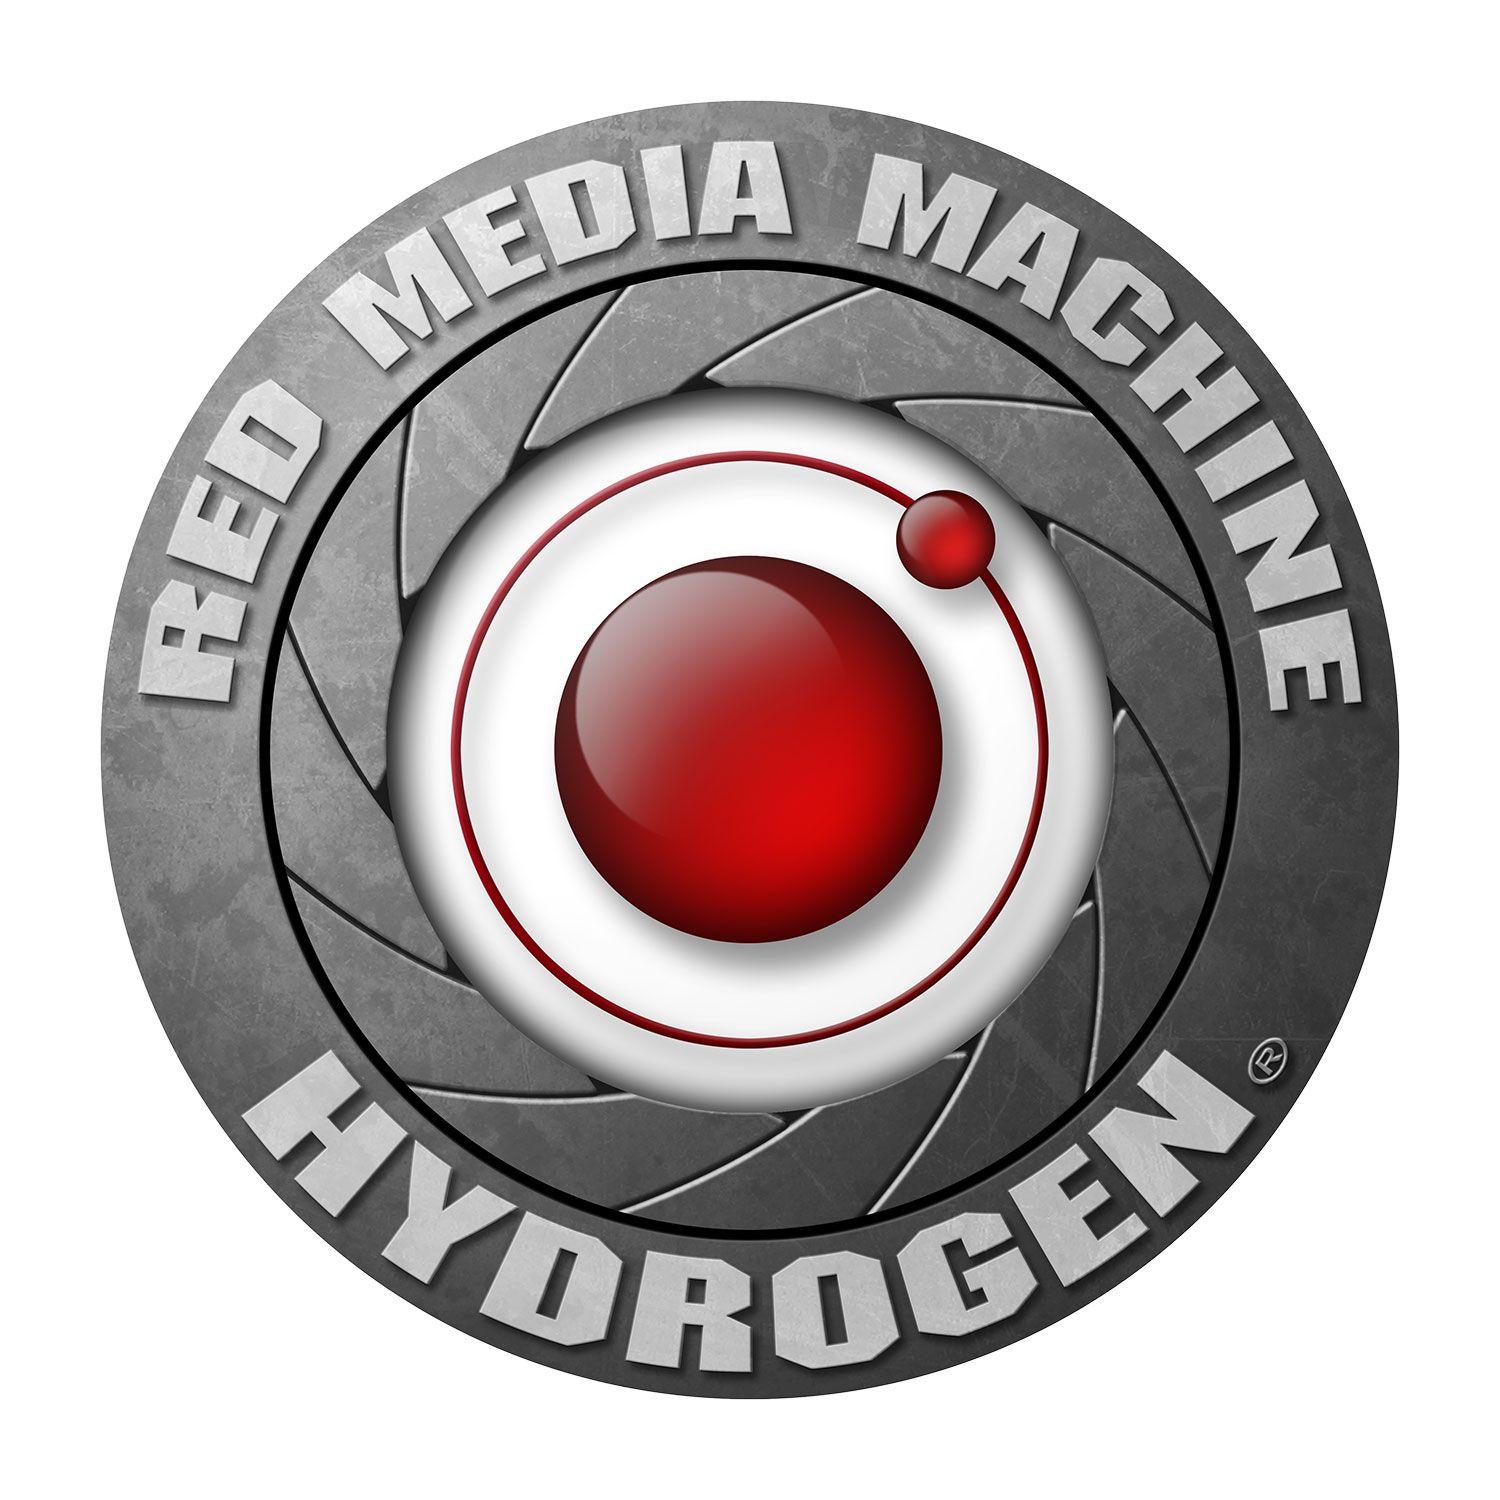 Studio Red Logo - Red's Hydrogen Smartphone Suffers Production Setback - Studio Daily